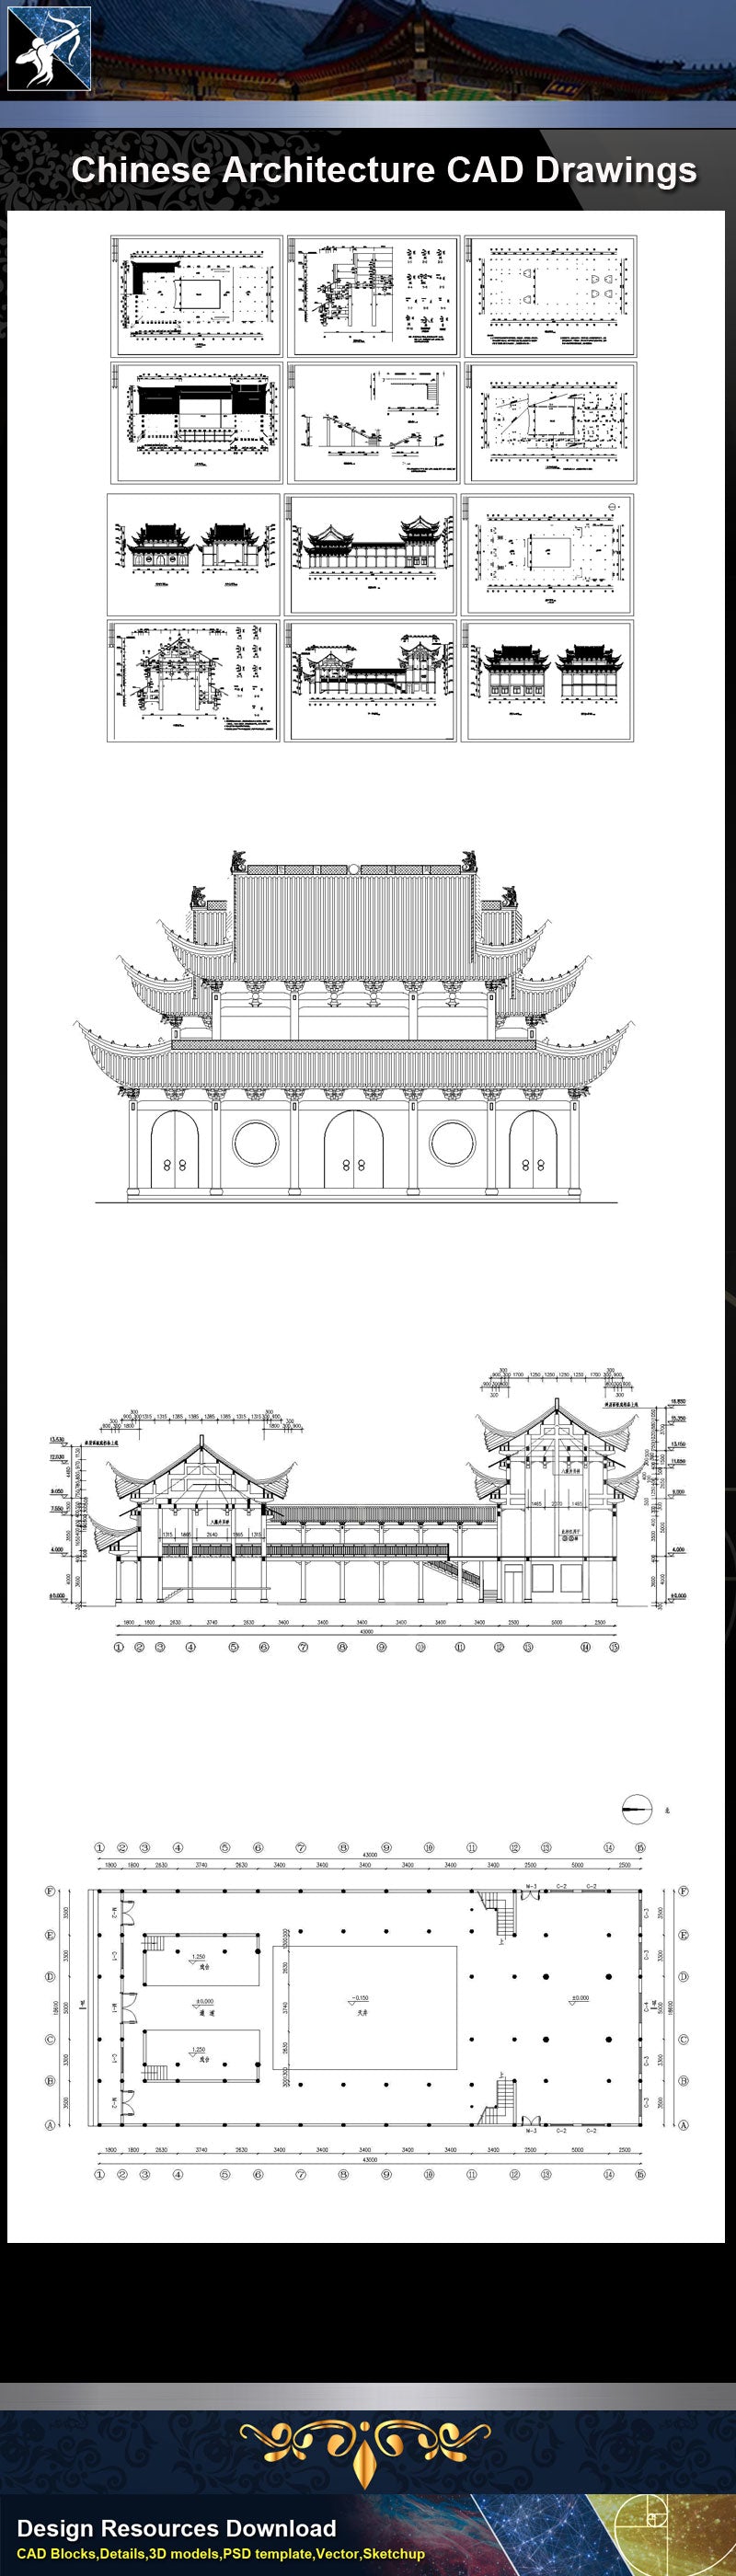 ★Chinese Architecture CAD Drawings-Chinese Architecture Design